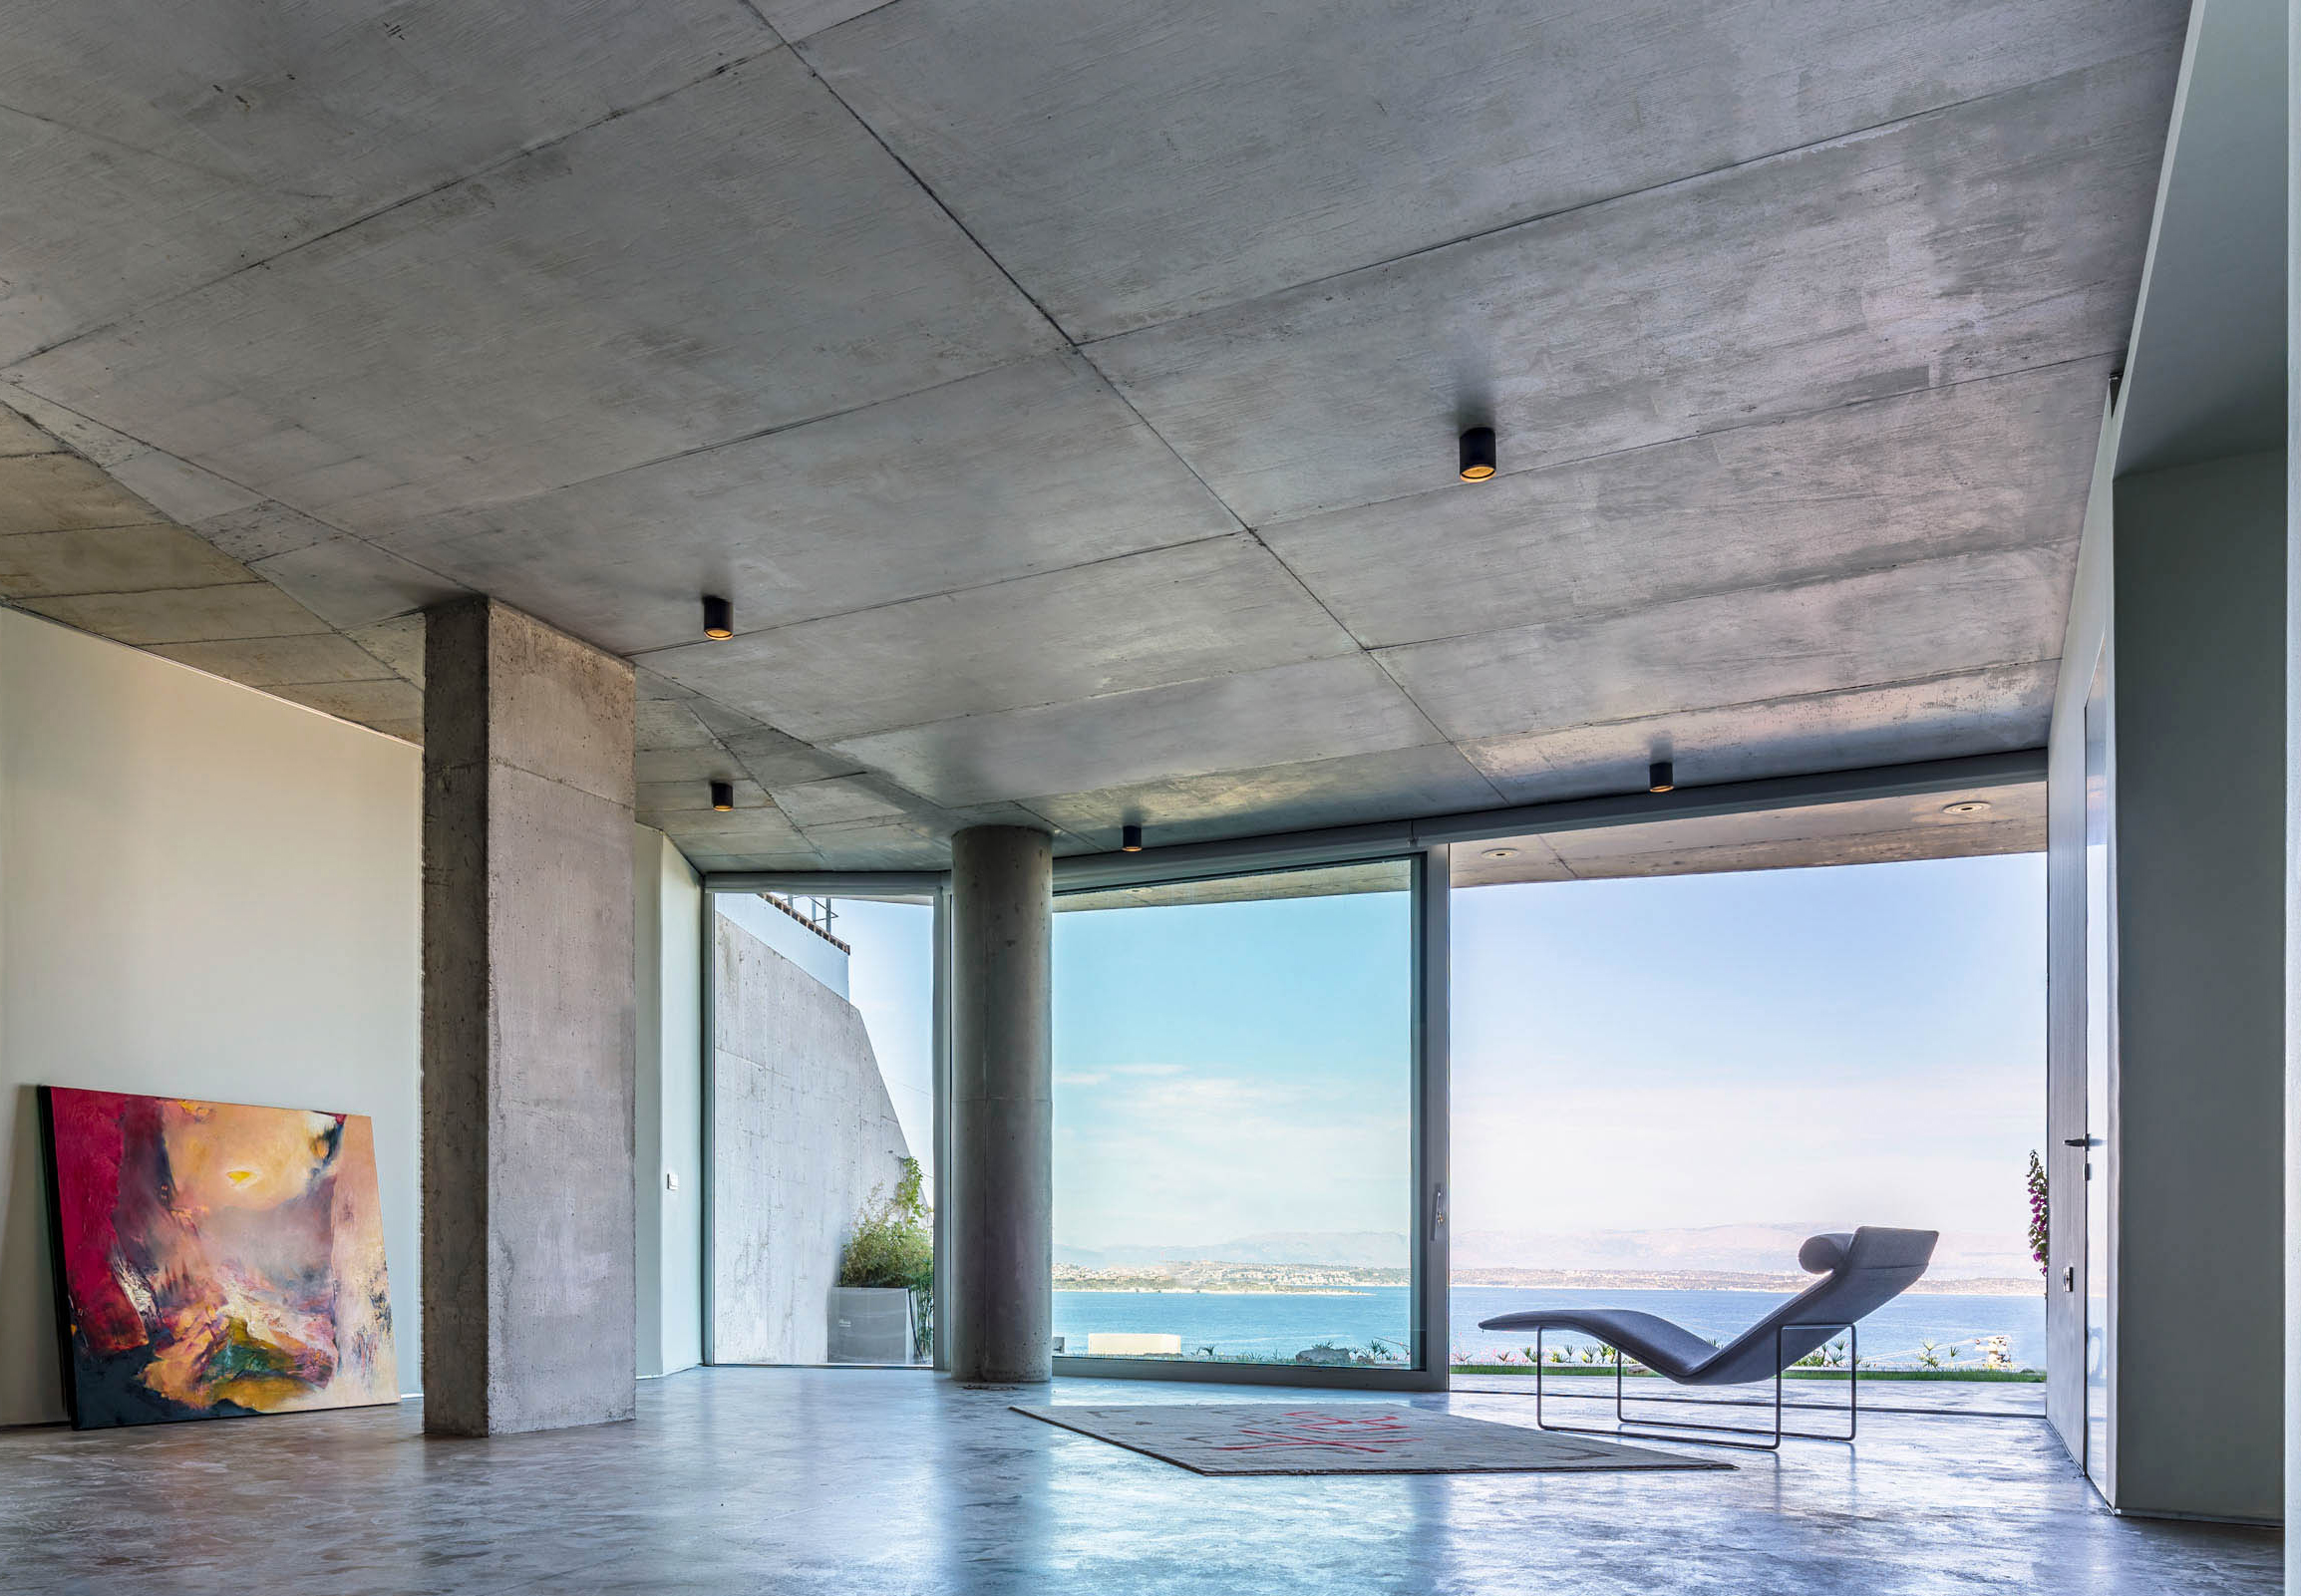 A NATURALLY VENTILATED PASSIVE HOUSE BY THE AEGEAN SEA